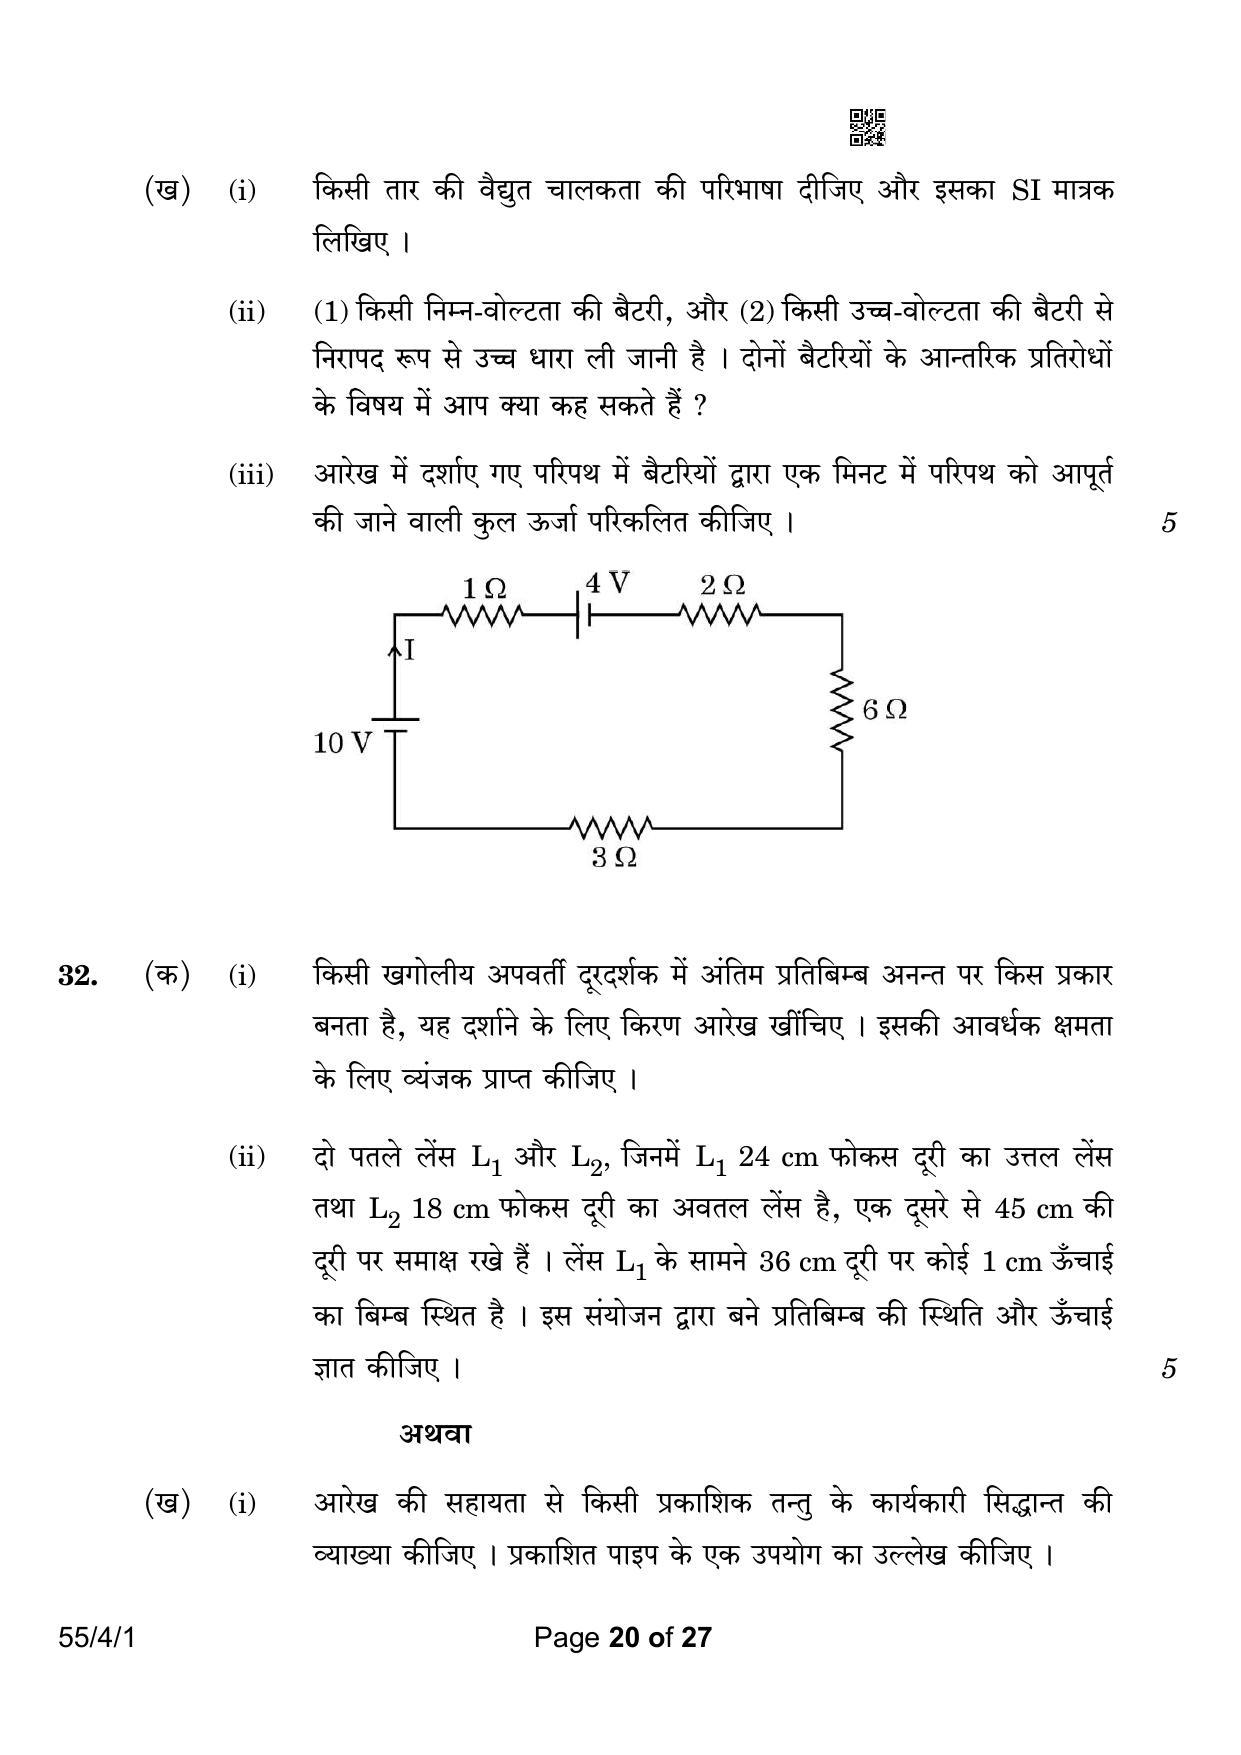 CBSE Class 12 55-4-1 Physics 2023 Question Paper - Page 20